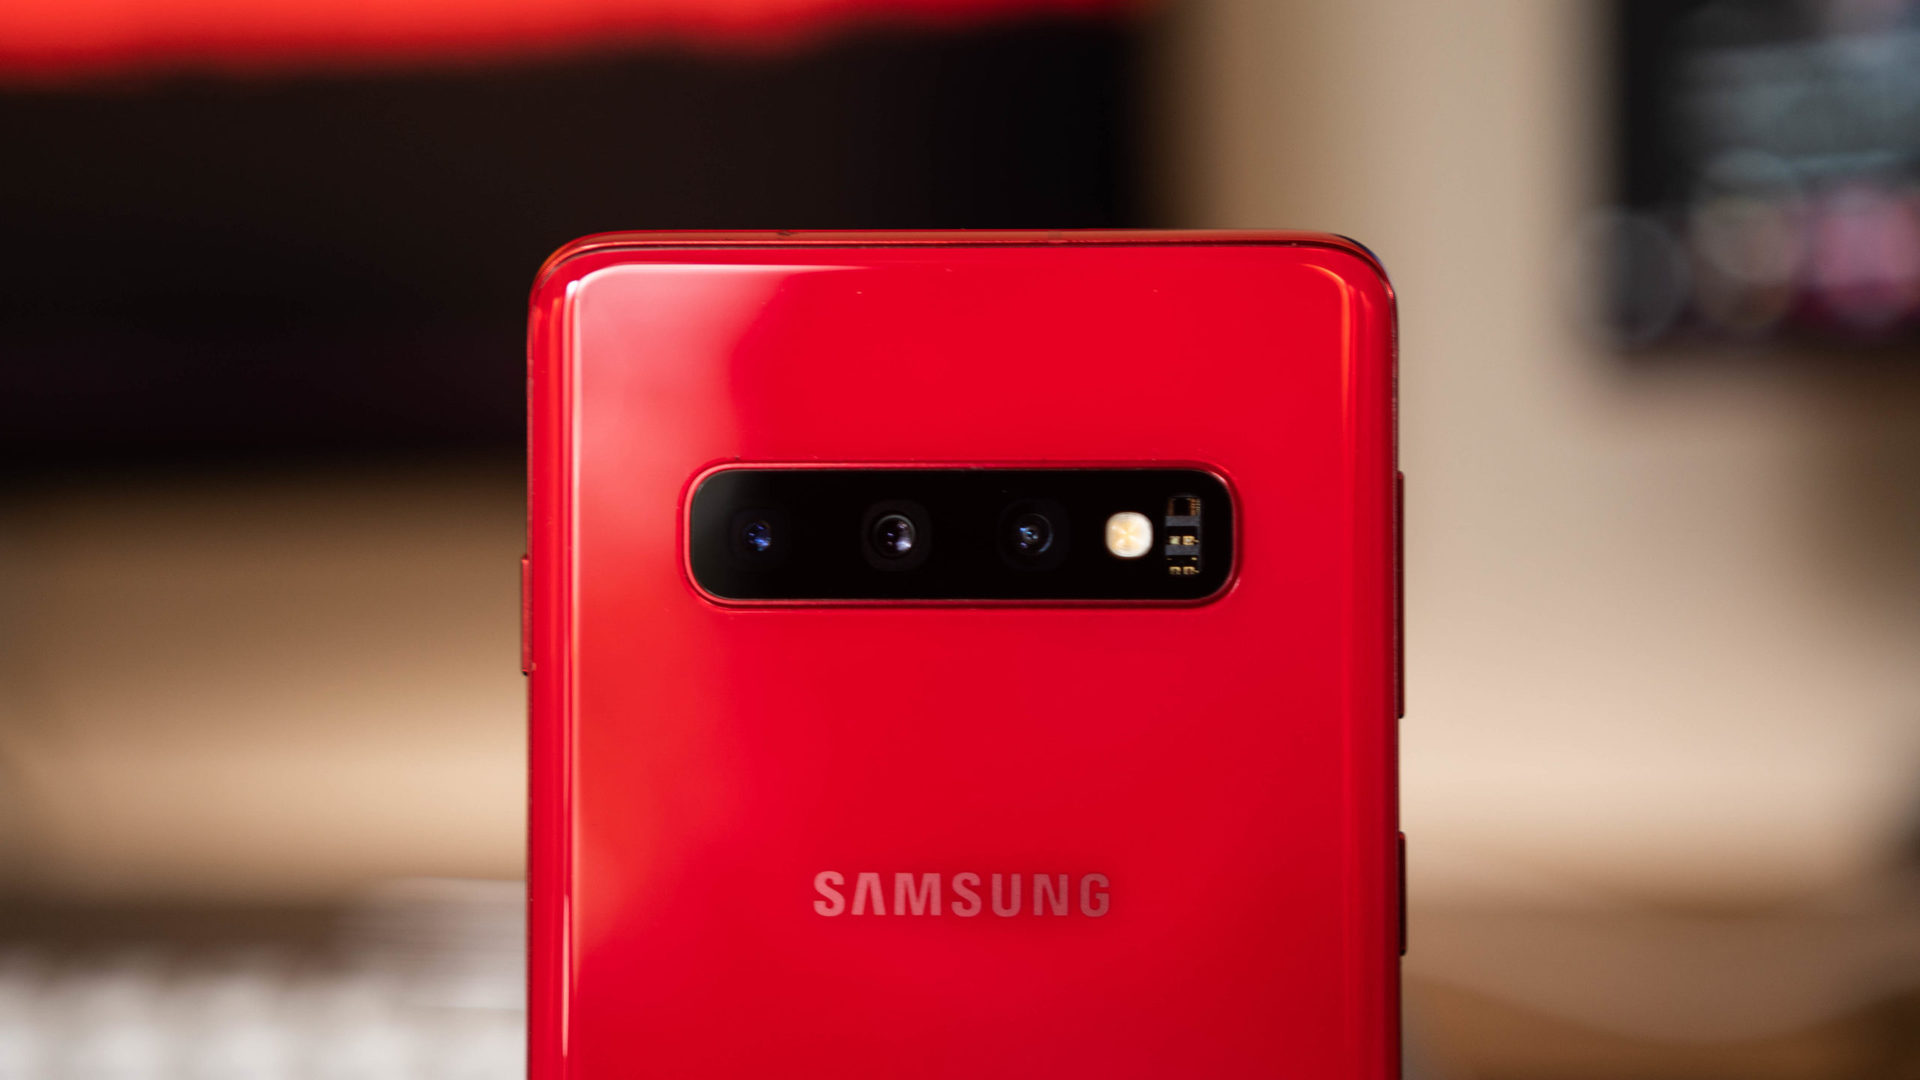 Samsung Galaxy S10 redux: The best of both worlds - Android Authority